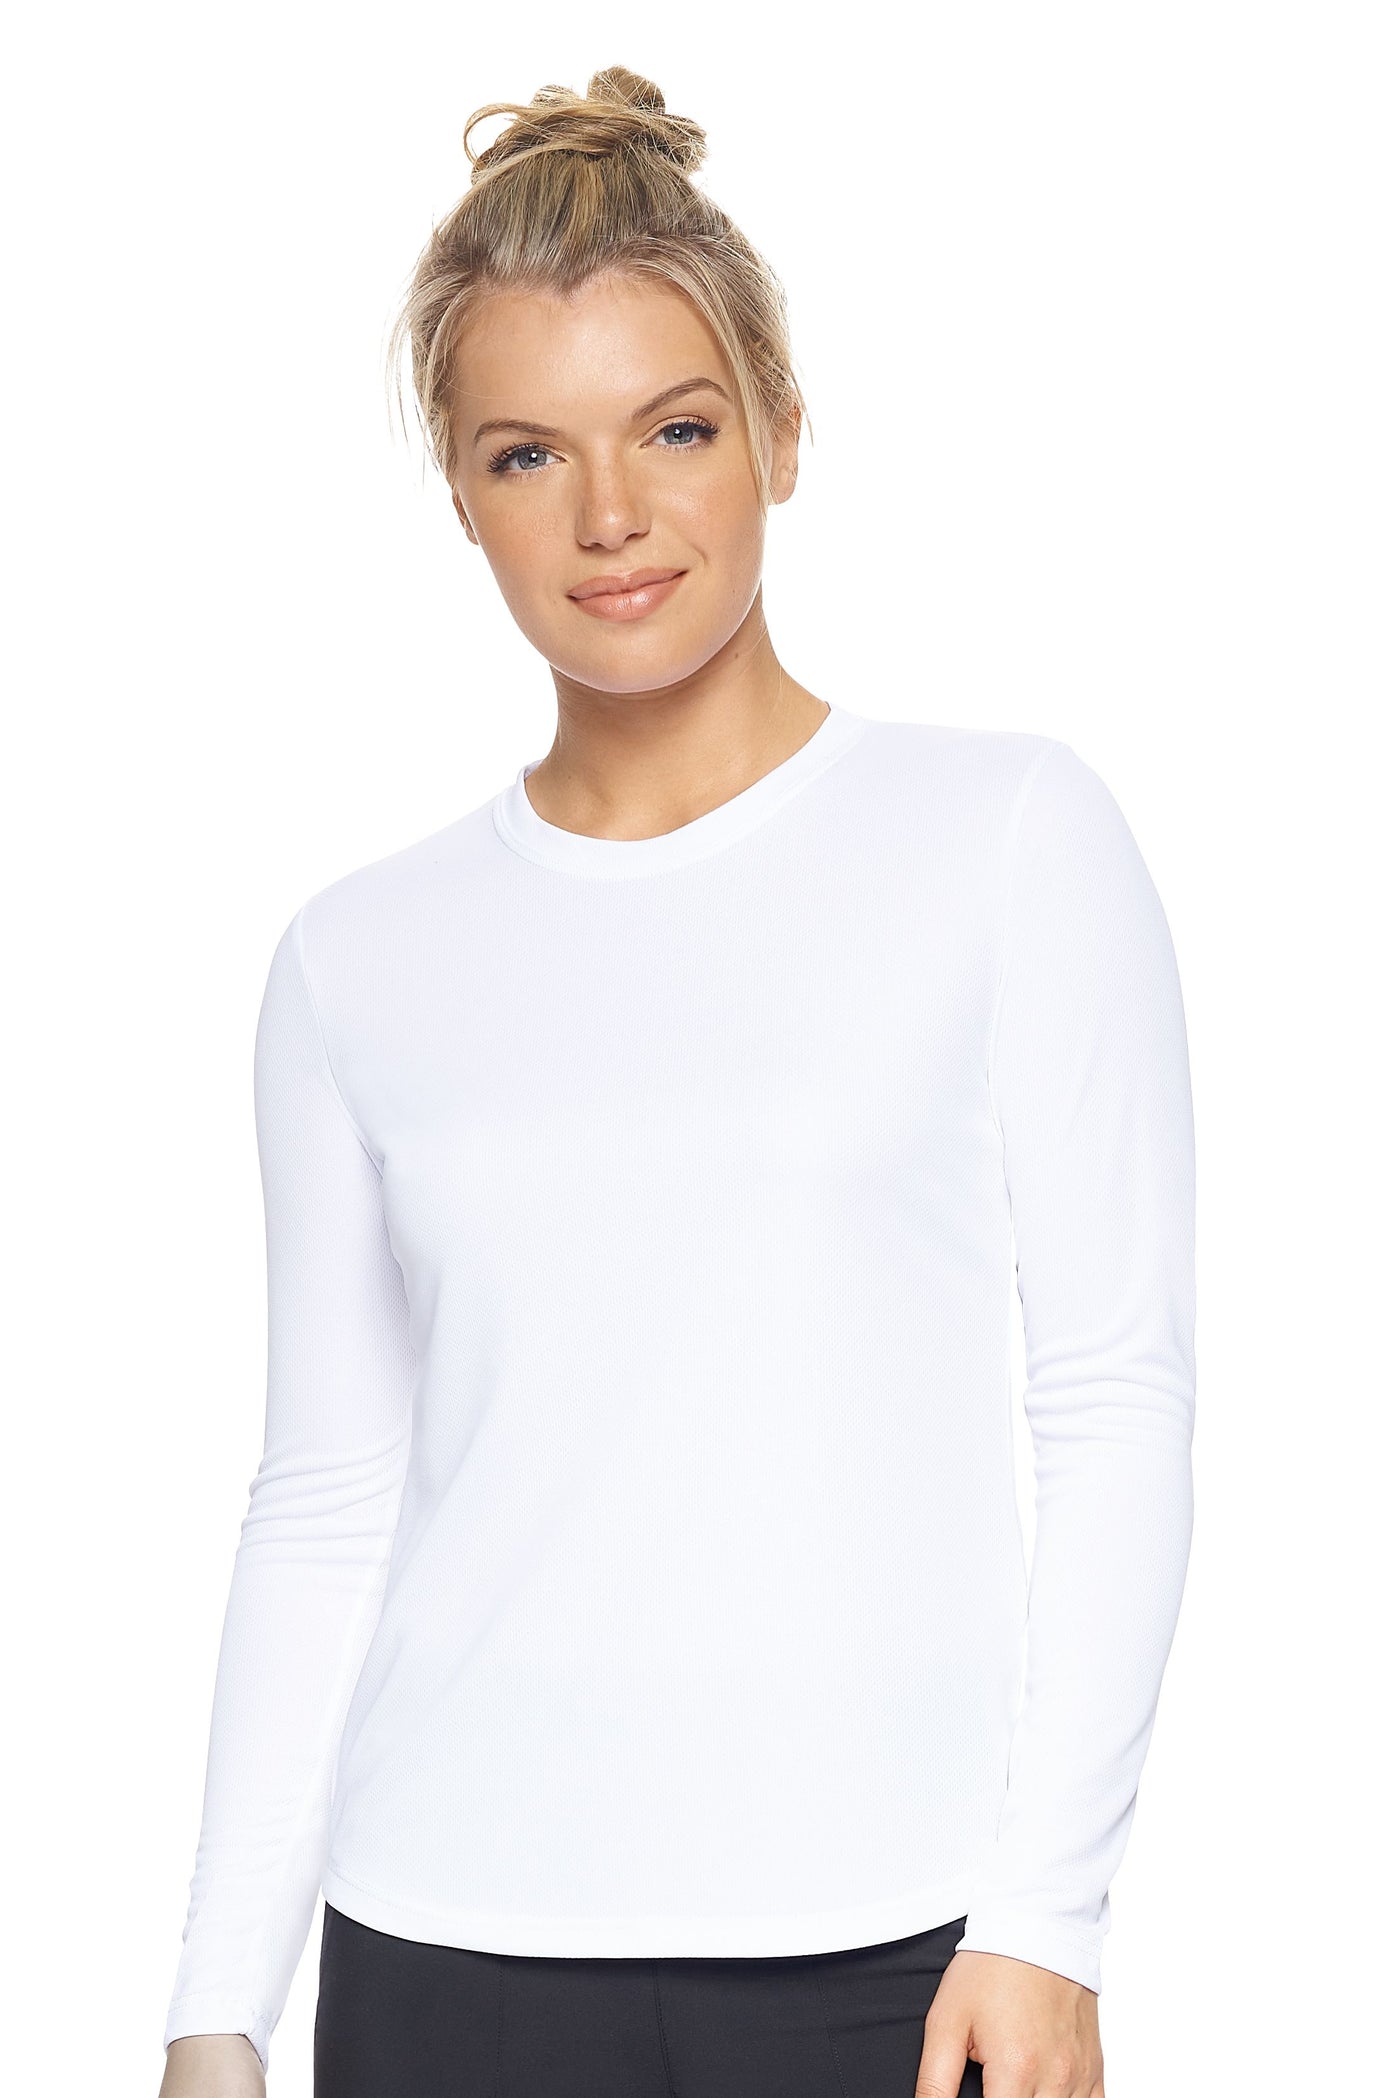 Expert Brand Retail Women's Long Sleeve Crewneck Tec Tee Made in USA Oxymesh white#color_white